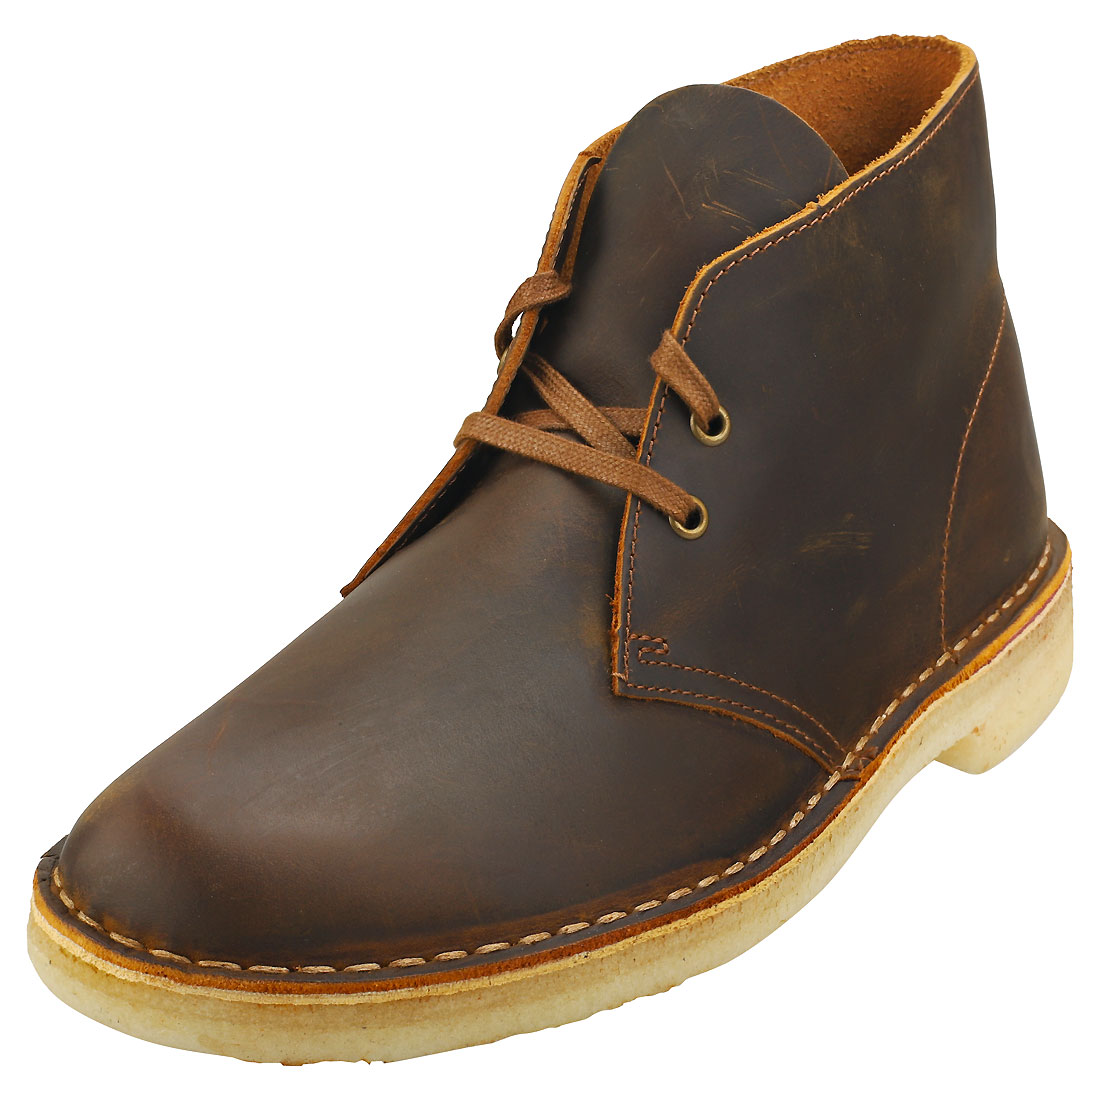 mens clarks beeswax boots